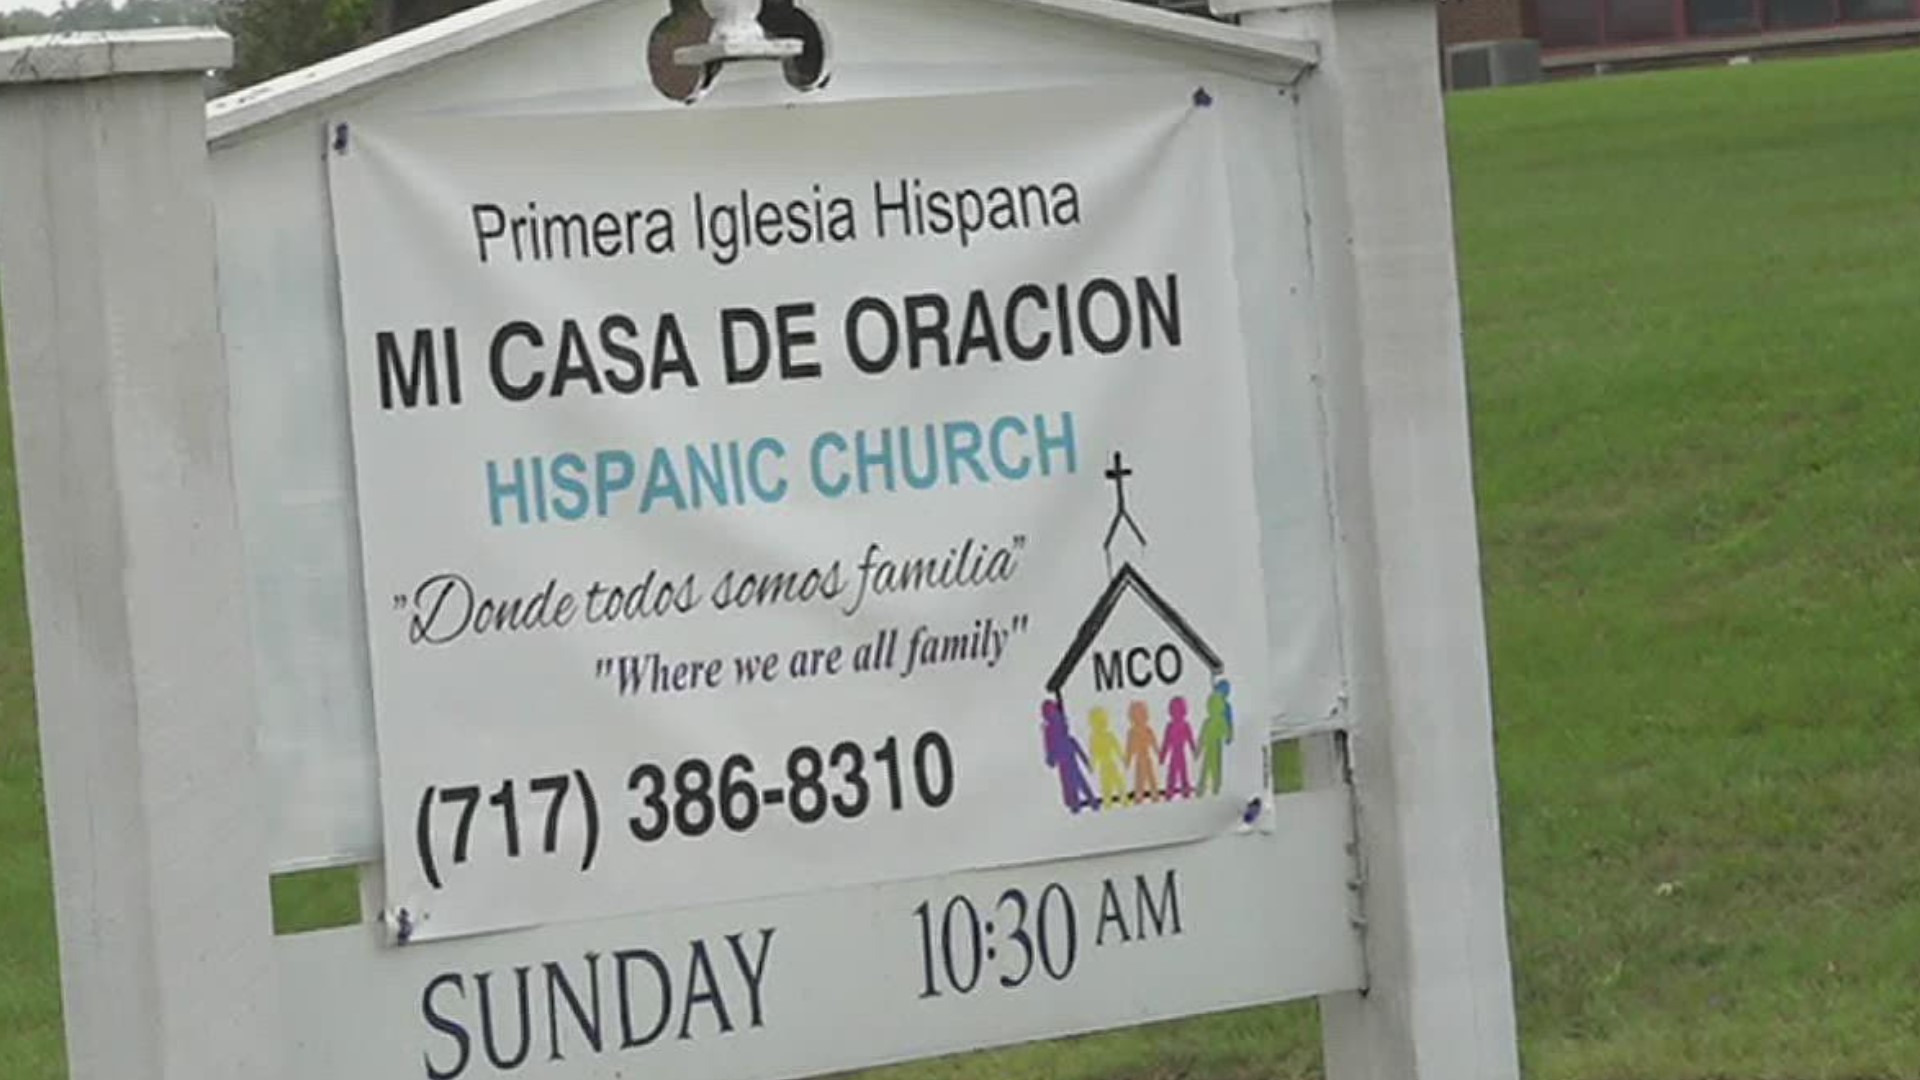 "There are so few Hispanic ministries in Carlisle, and people need to hear of God's love in their heart language."